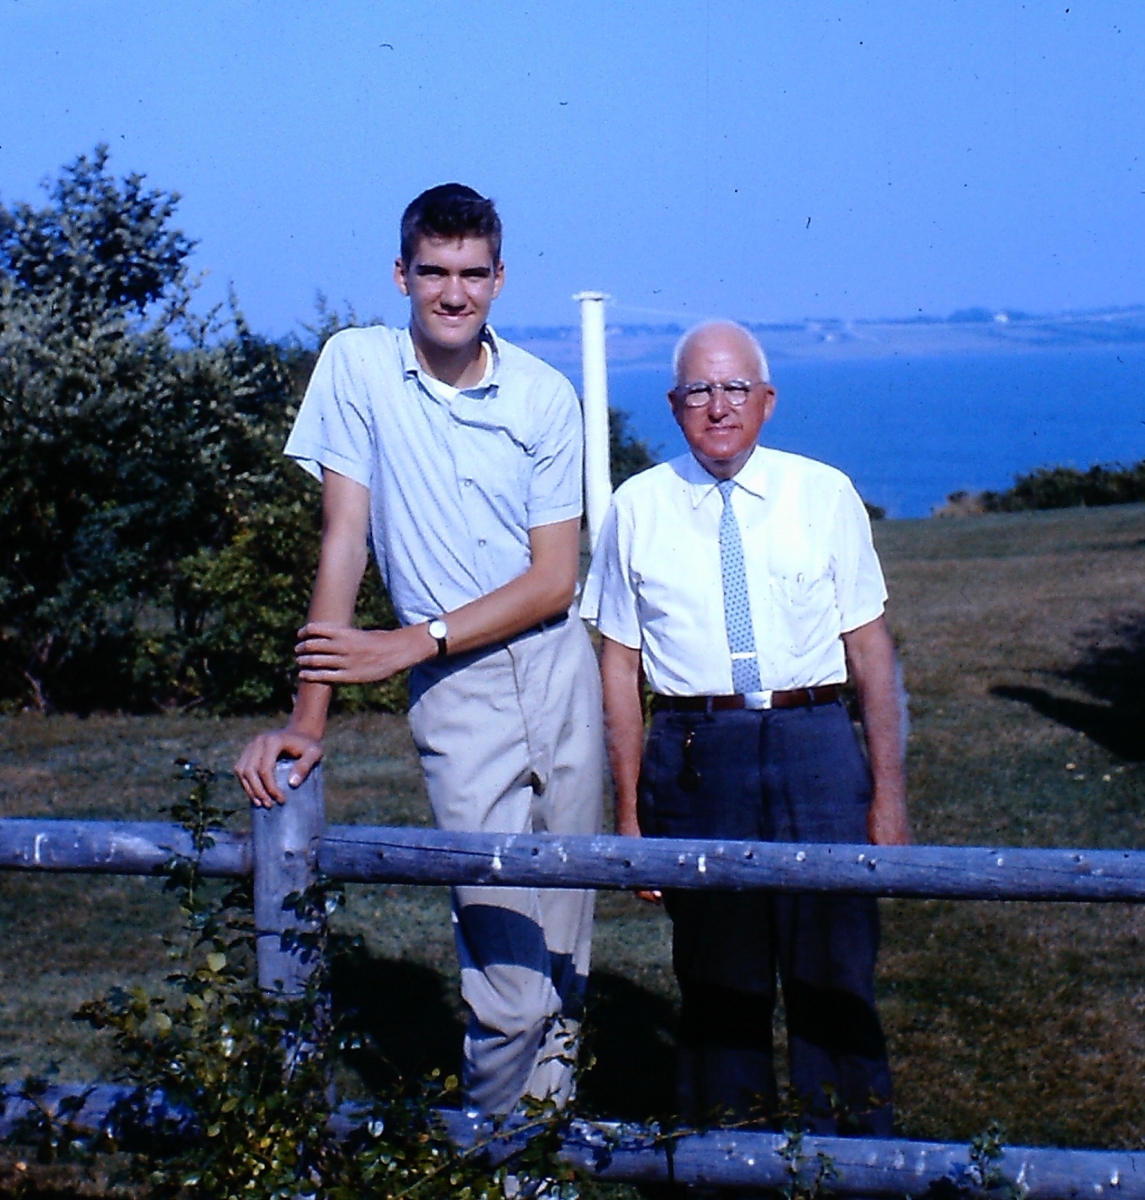 The author with his grandfather, R. Bruce Lindsay.